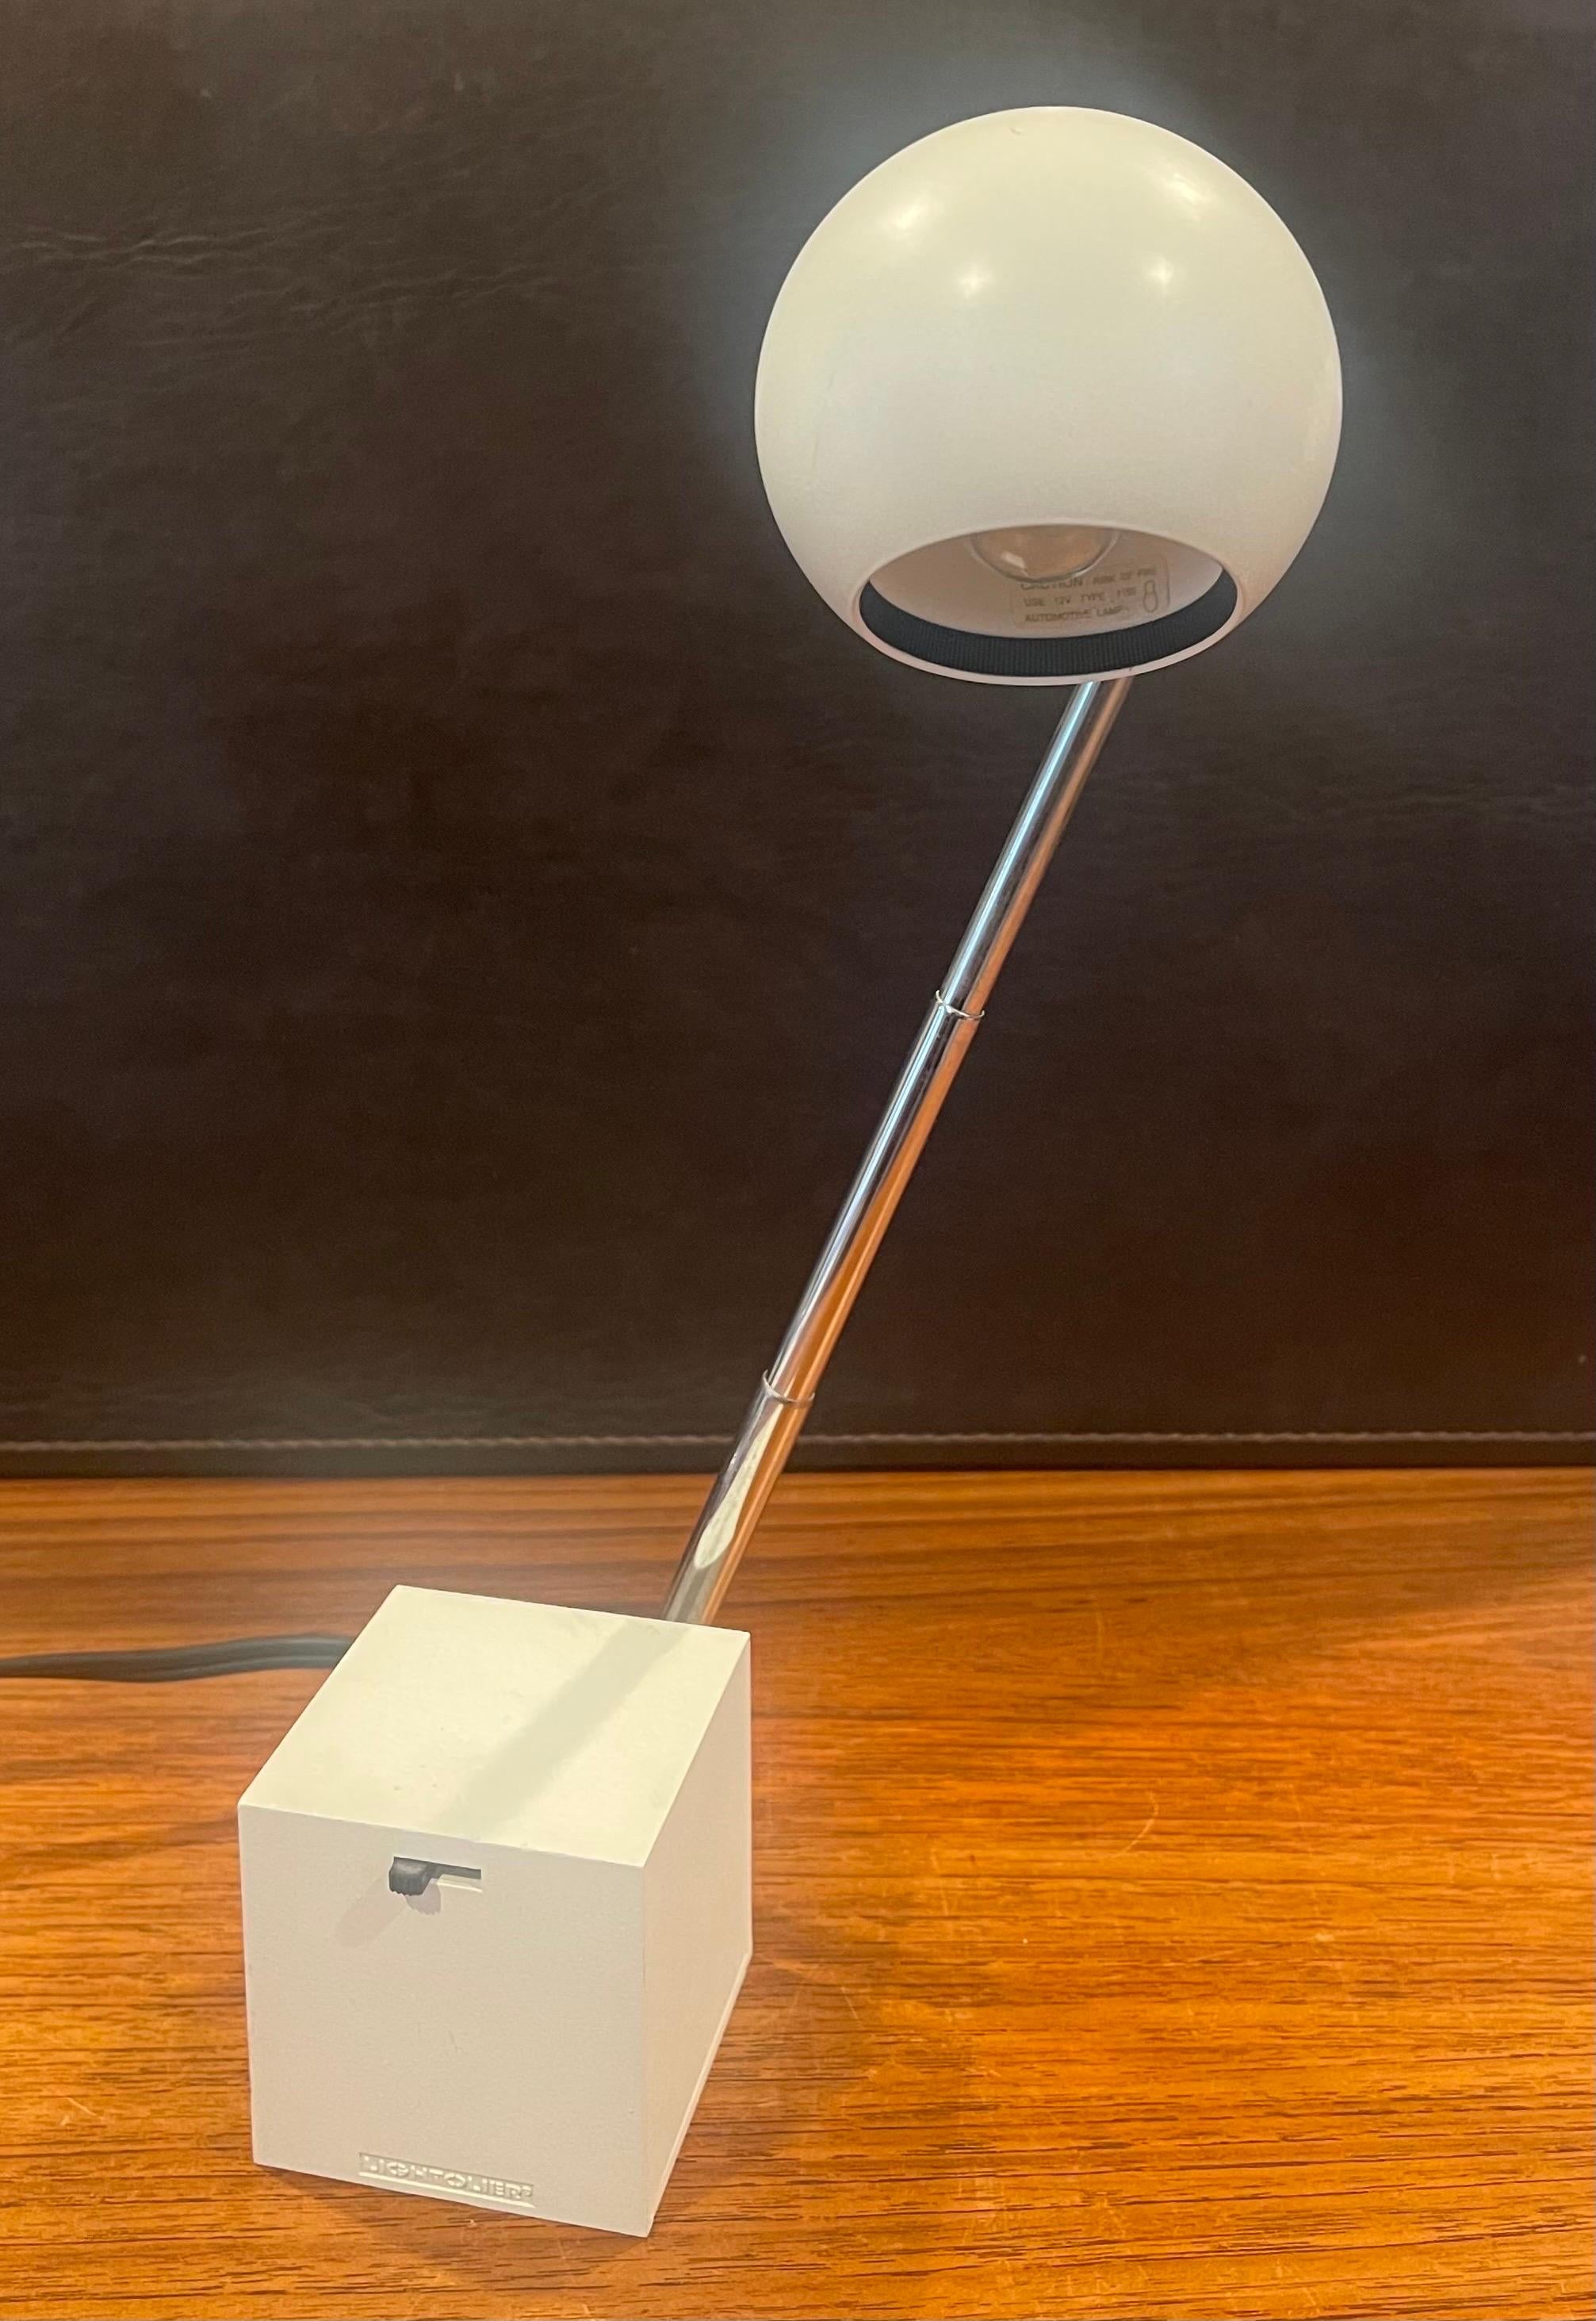 Lytegem Spherical Desk Lamp by Michael Lax for Lightoiler In Good Condition For Sale In San Diego, CA